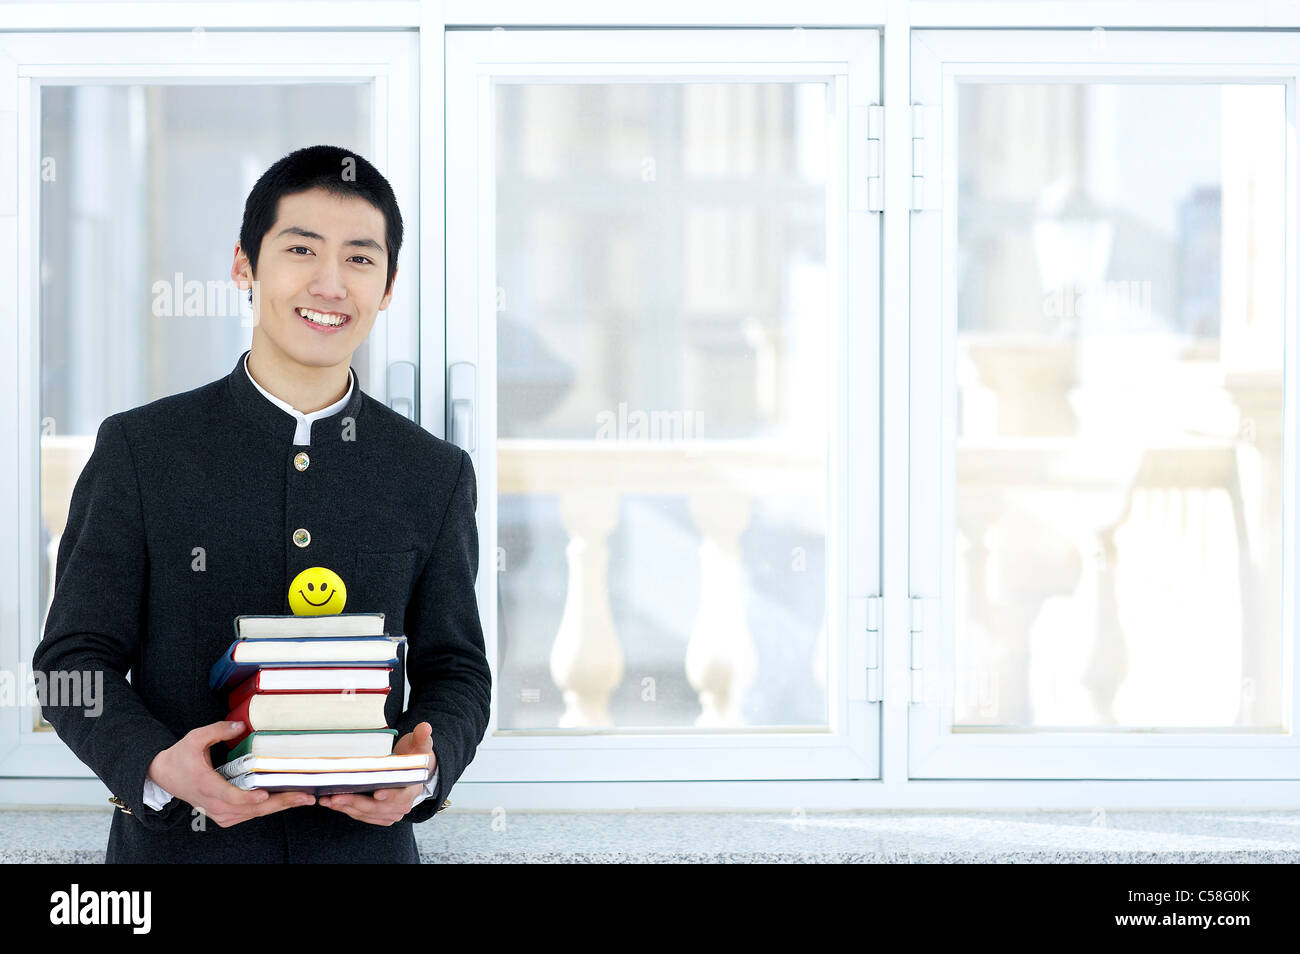 Portrait of teenage boy standing in college, holding books Banque D'Images